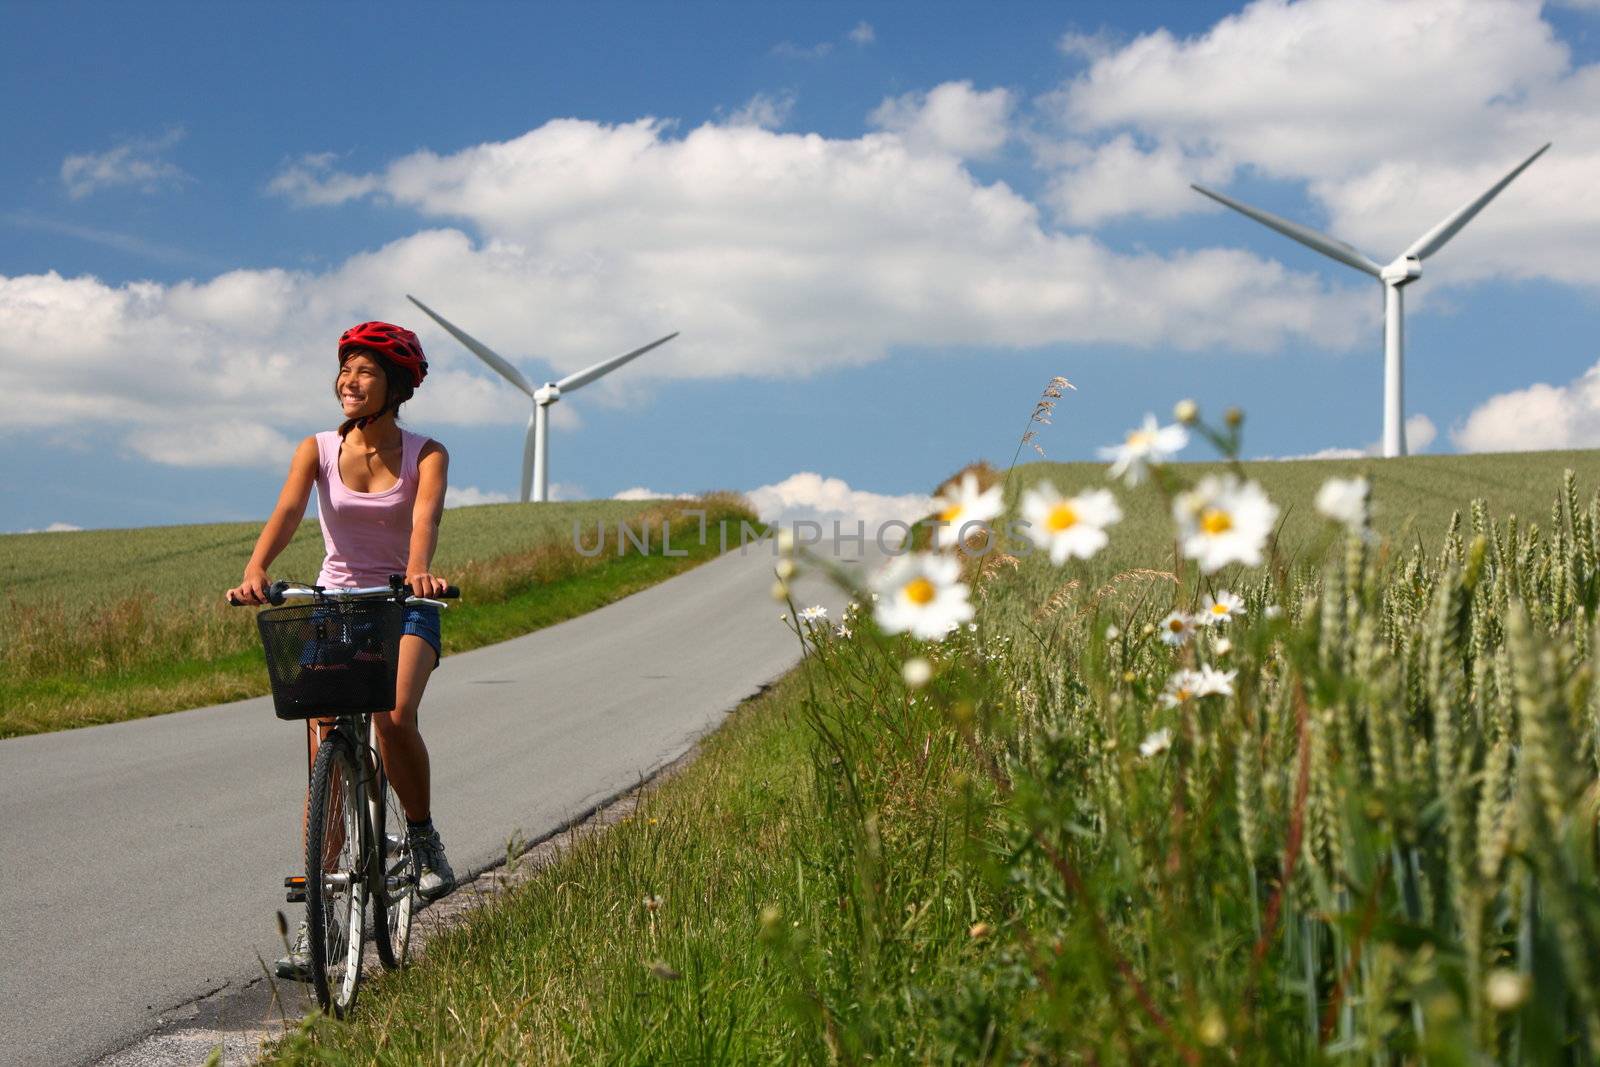 Woman relaxing and enjoying the sun on a bike trip in the countryside of Jutland, Denmark Windmill in the background.